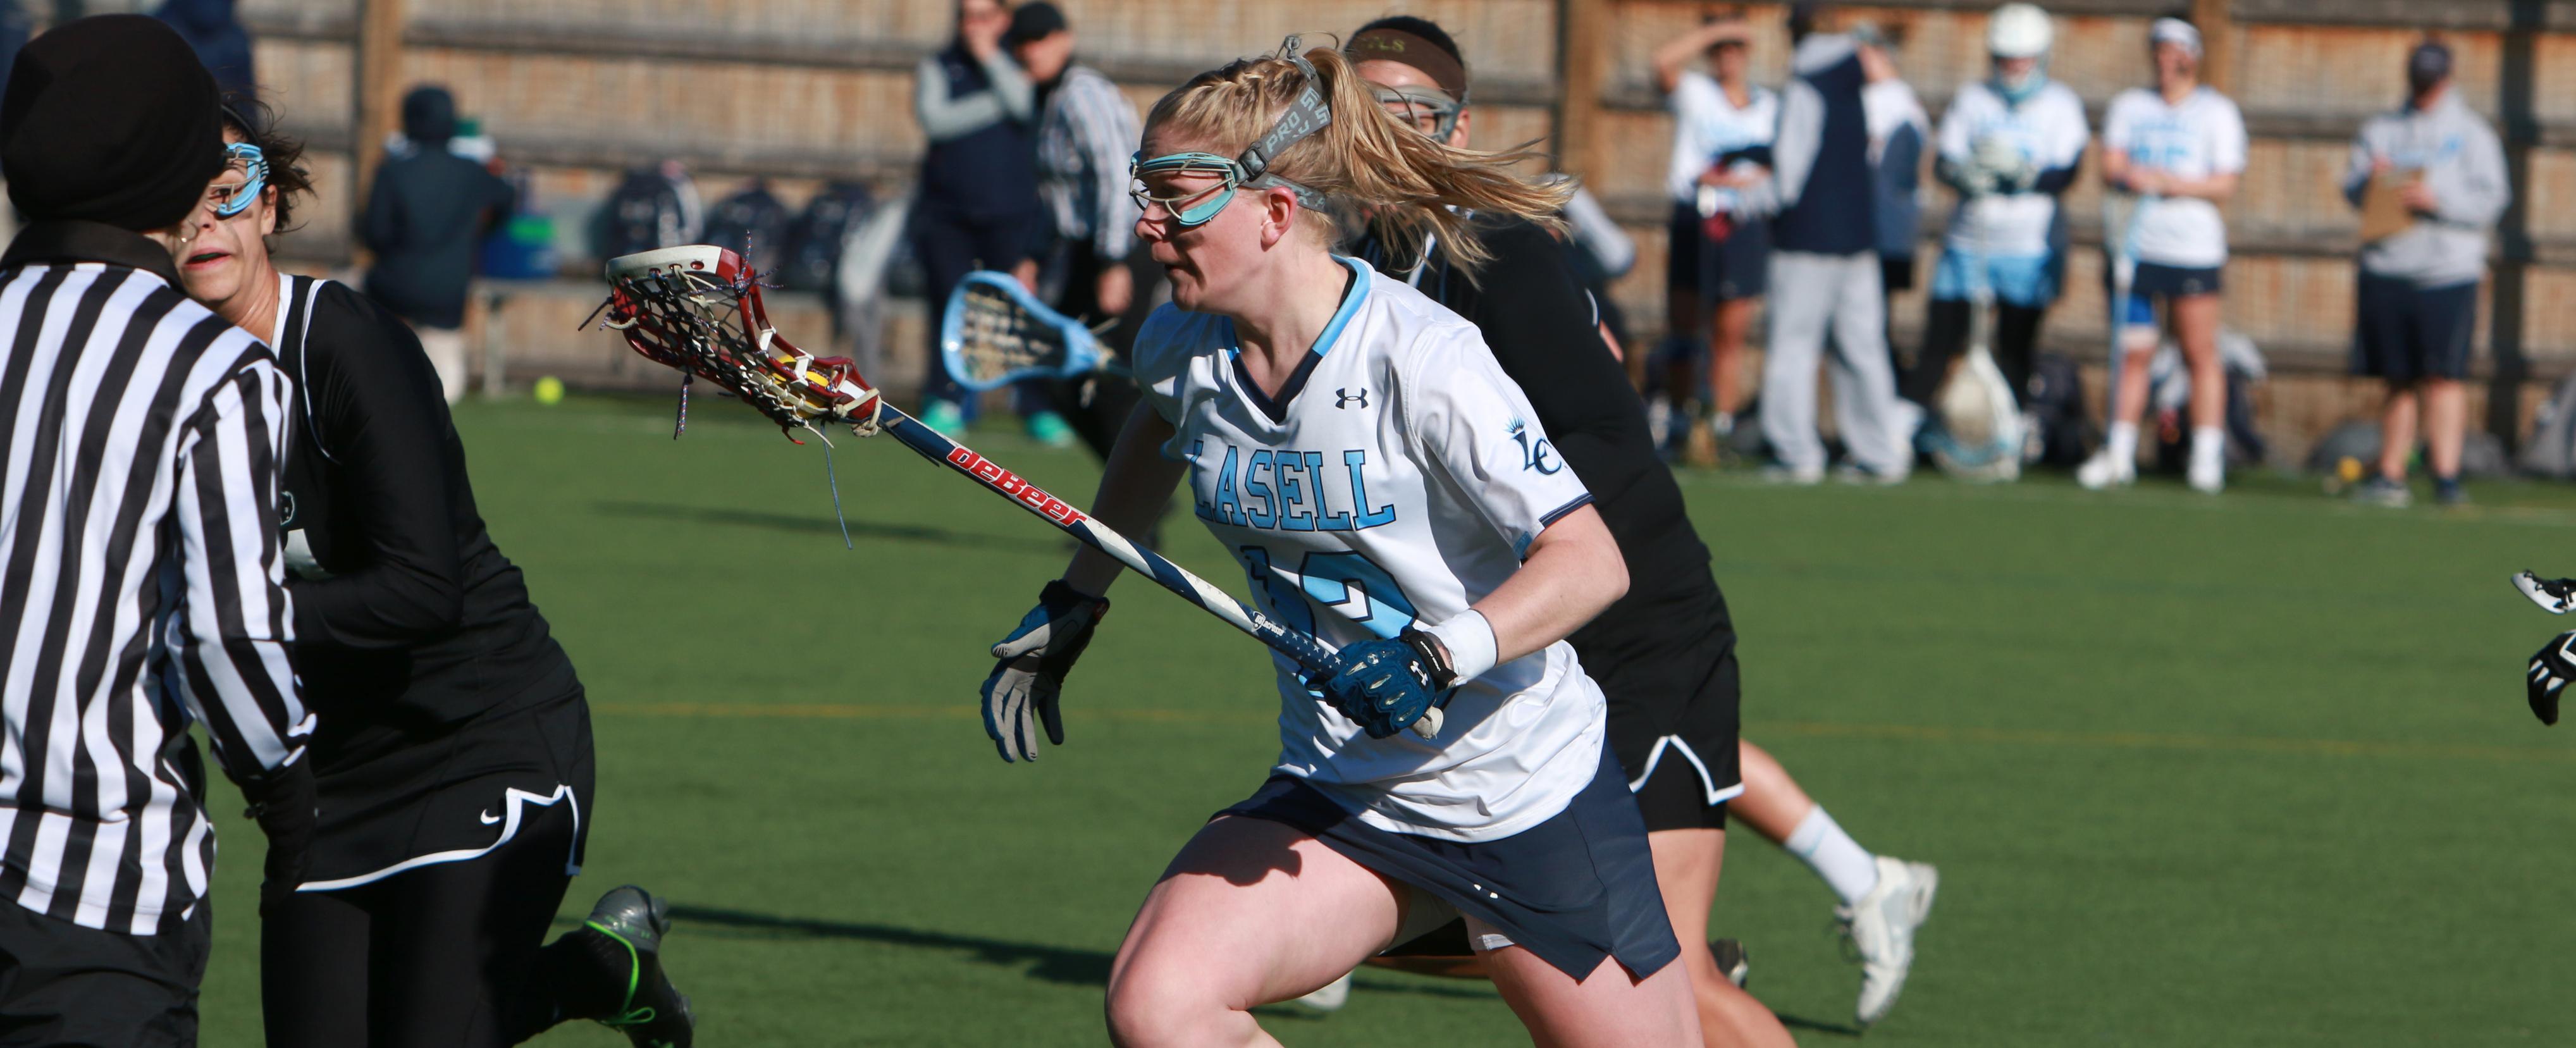 Women's Lacrosse Cruises to 18-6 Victory over Mustangs